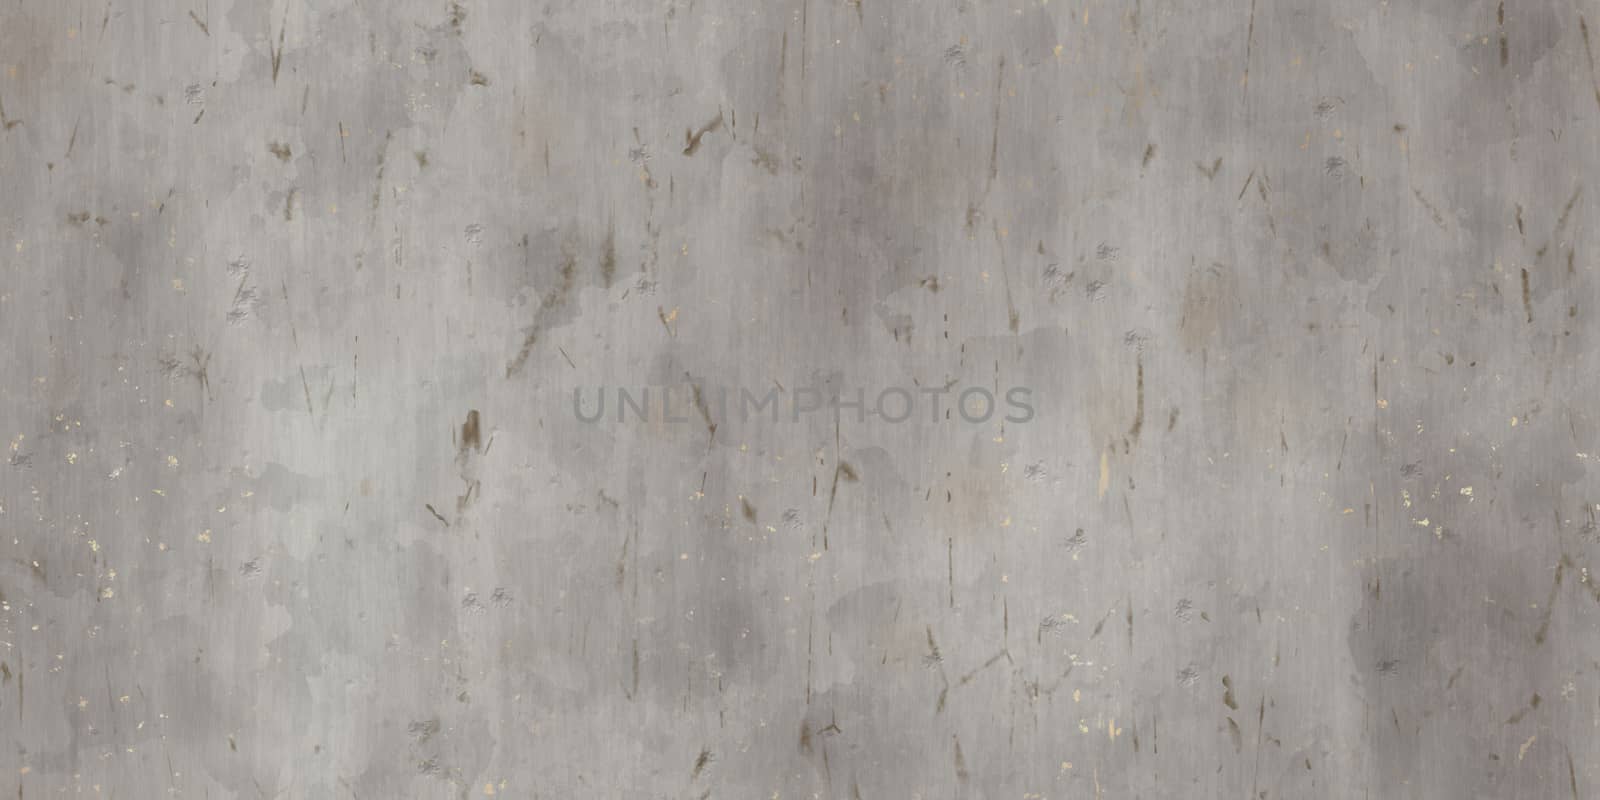 Seamless Smooth Concrete Background with Spot and Slicks. Polished Urban Cement Wall Texture.